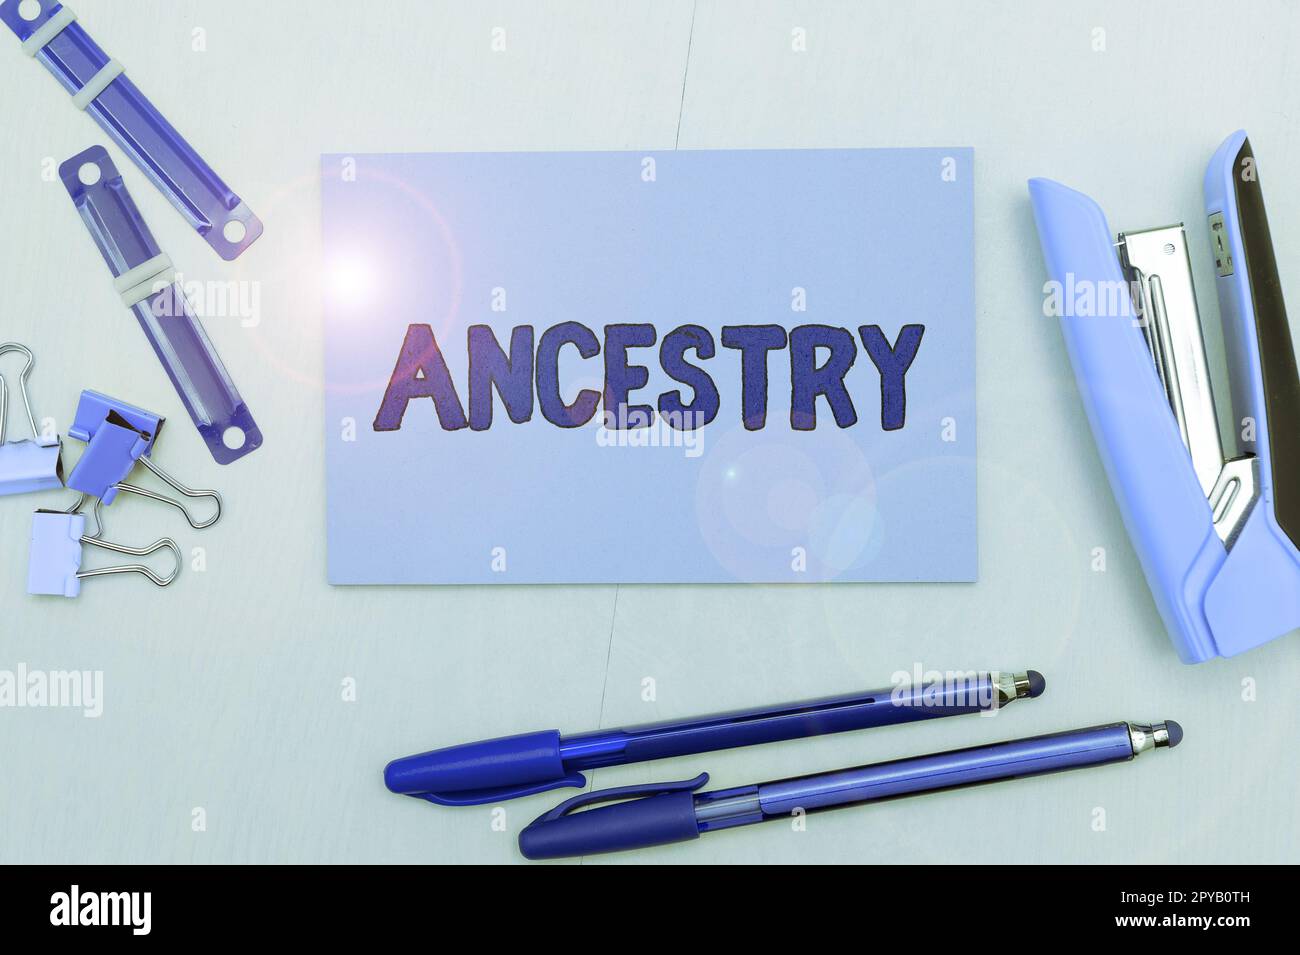 Writing displaying text Ancestry. Business showcase the history or developmental process of a phenomenon object idea or style Stock Photo